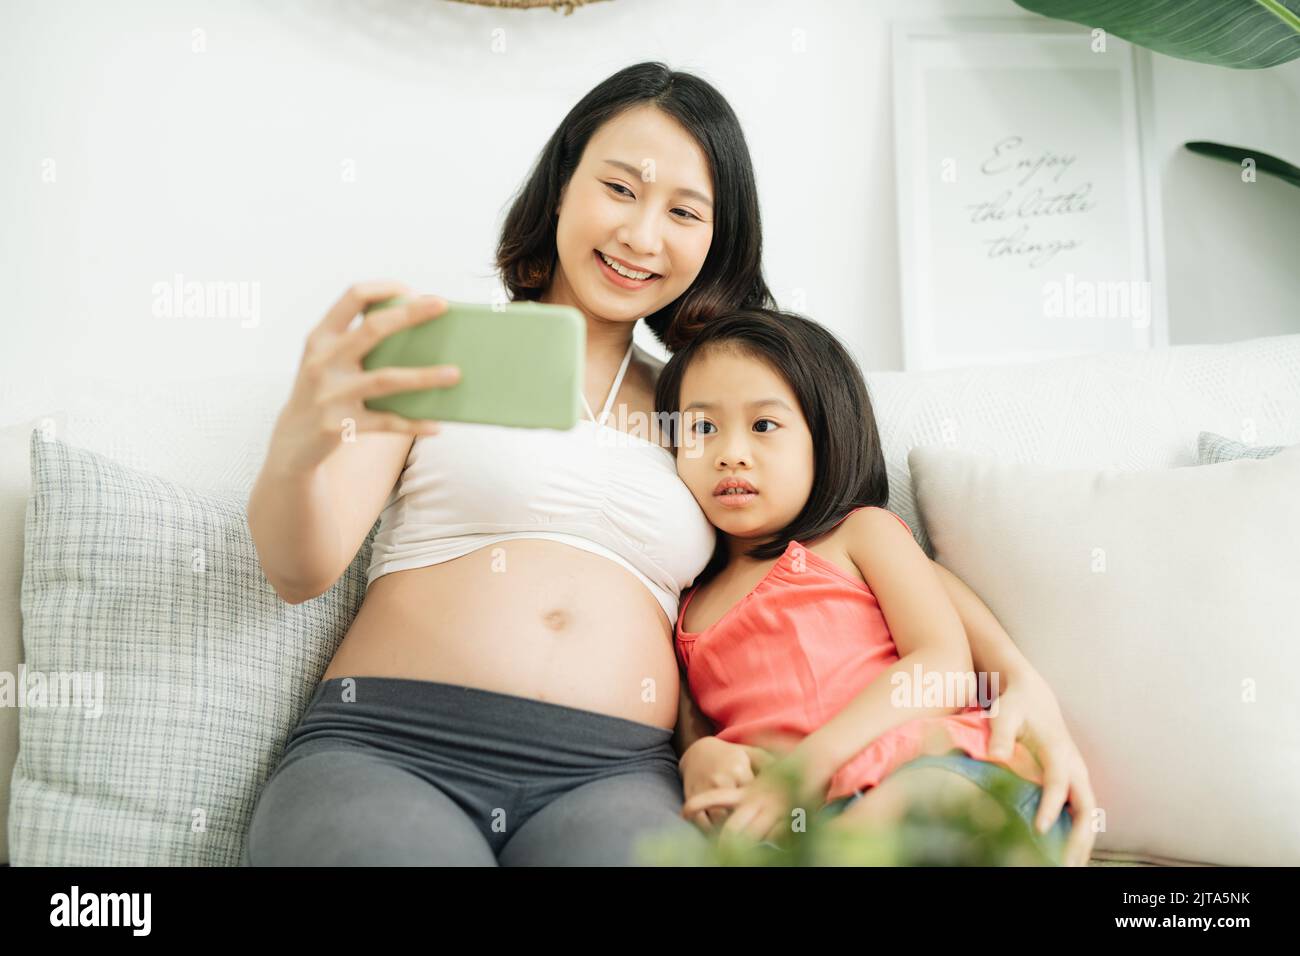 Mother and daughter taking pictures Stock Photo